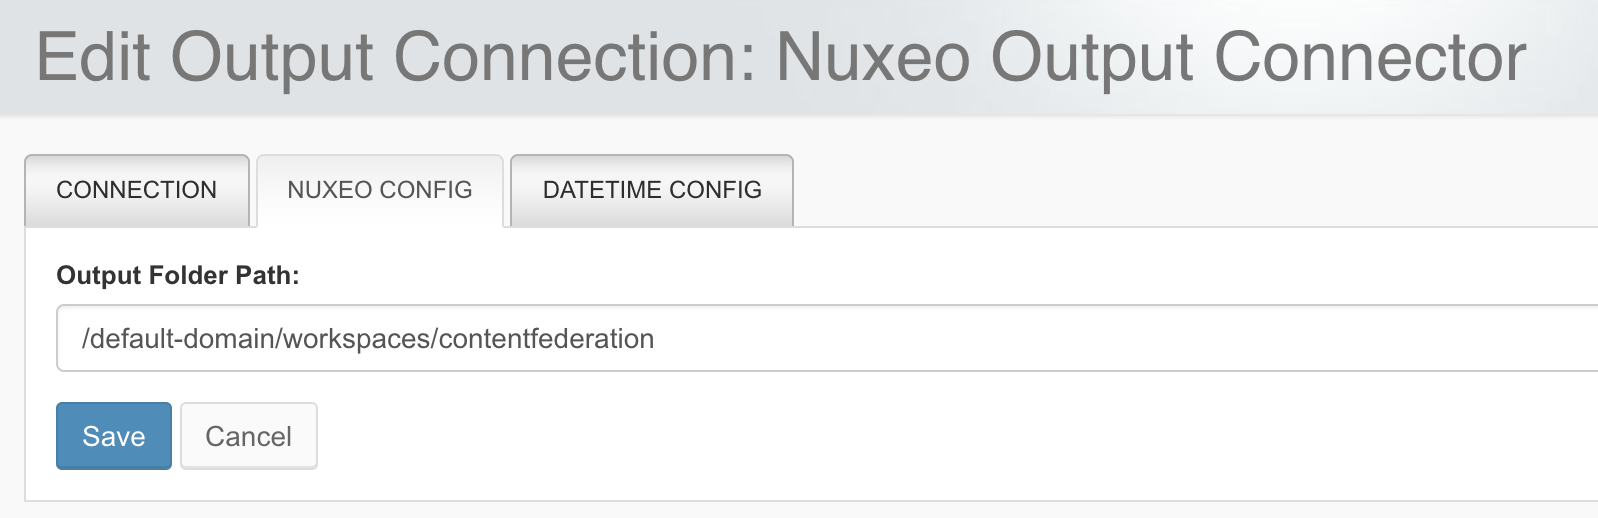 nuxeo-output-connector2.png